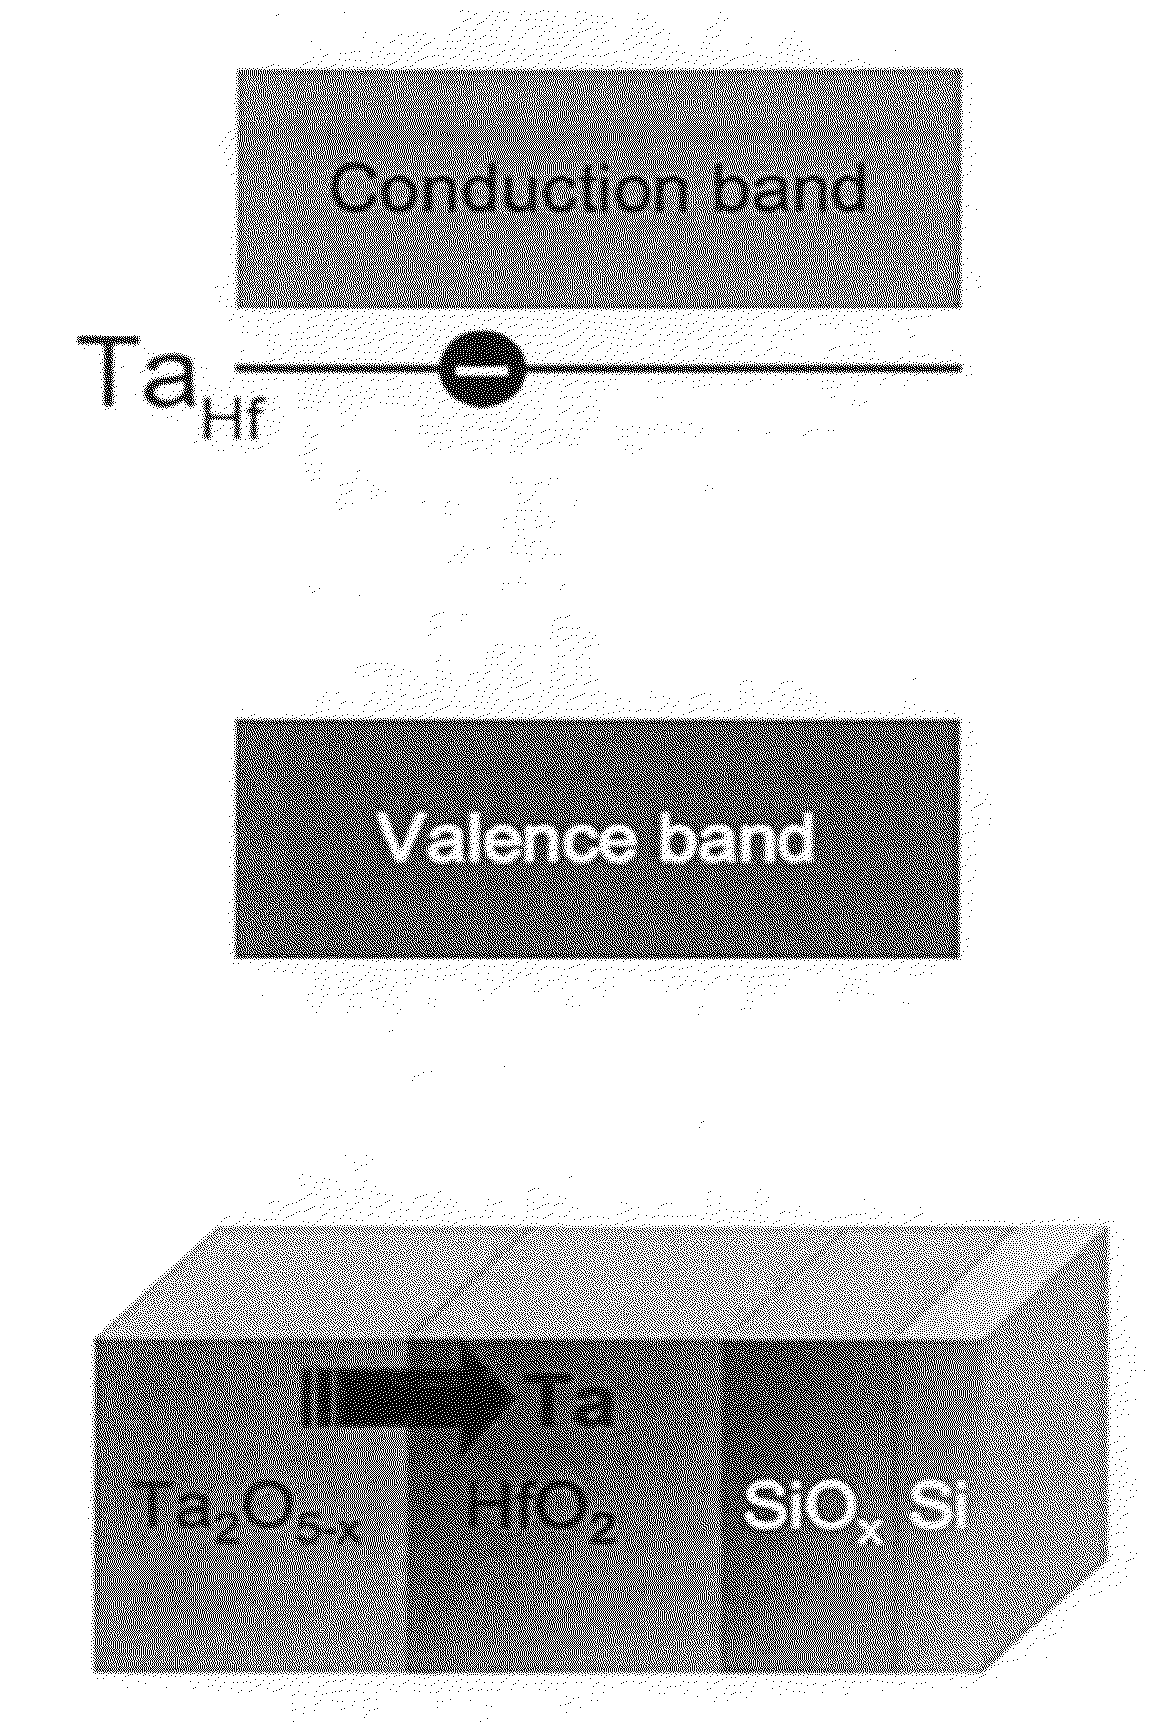 Method for Reducing Thickness of Interfacial Layer, Method for Forming High Dielectric Constant Gate Insulating Film, High Dielectric Constant Gate Insulating Film, High Dielectric Constant Gate Oxide Film, and Transistor Having High Dielectric Constant Gate Oxide Film